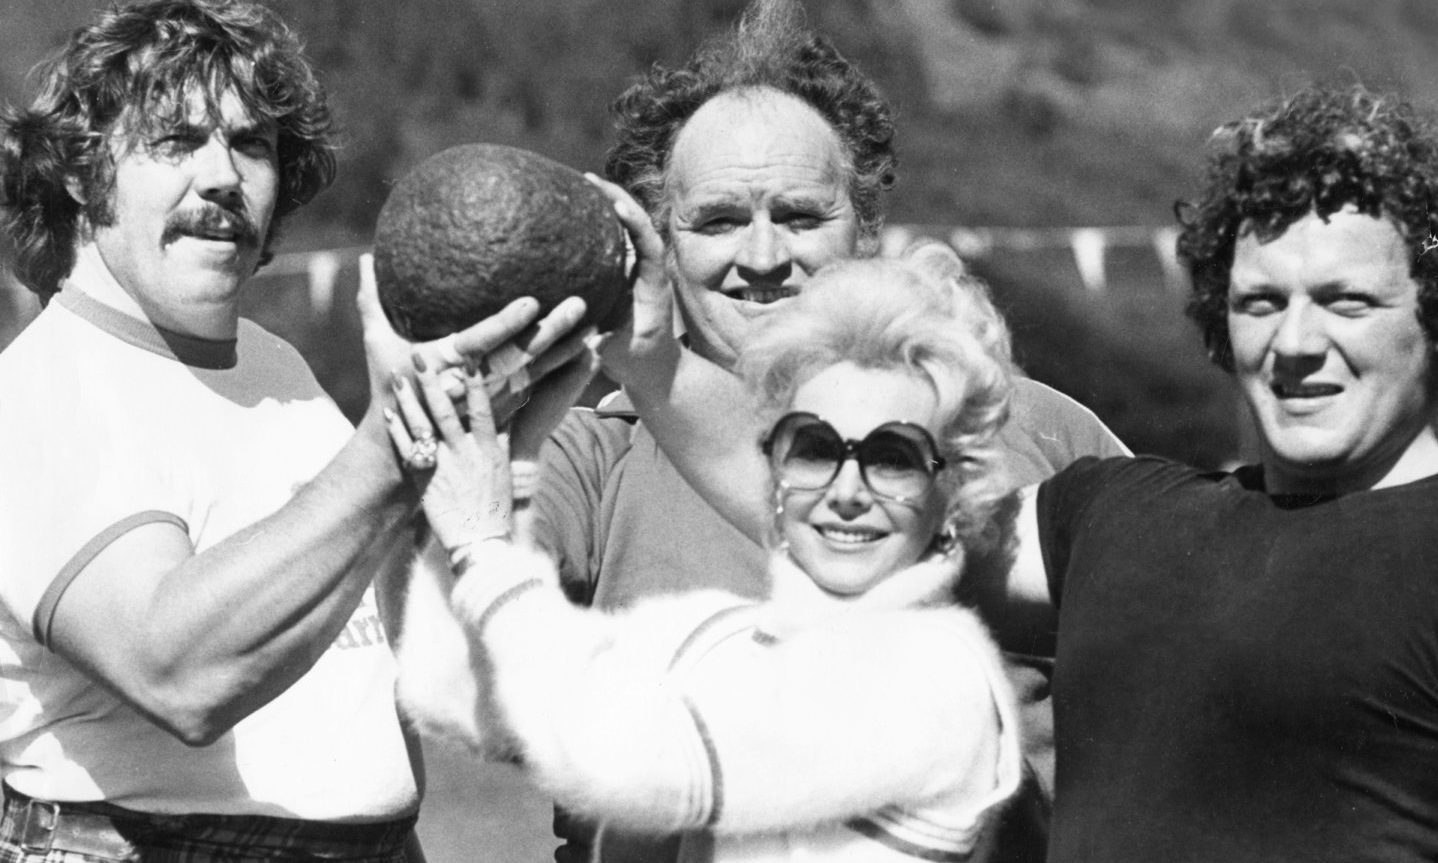 Eva Gabor brought Hollywood glamour to Ballater Highland Games as a guest celebrity in 1978.